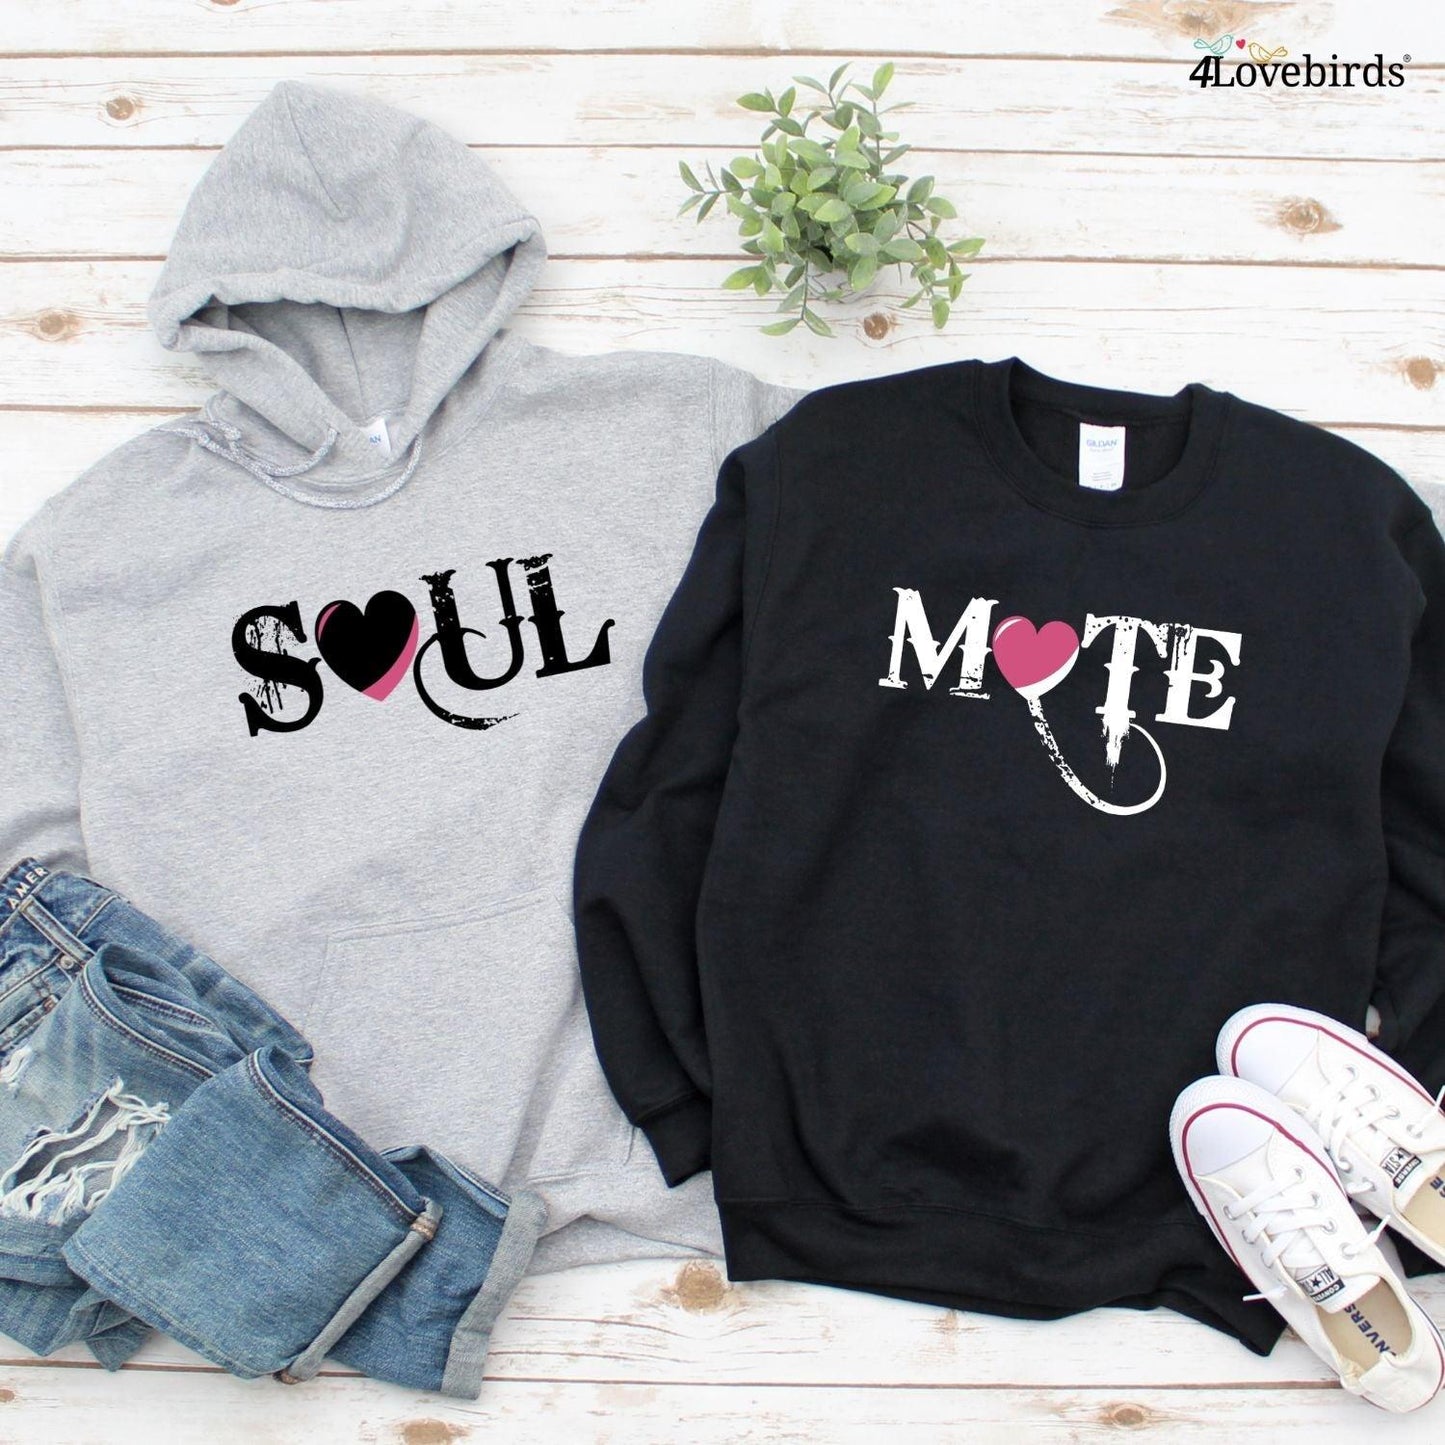 Matching Set: Soul Mate & Mate Shirts for Valentine's & Weddings - 4Lovebirds